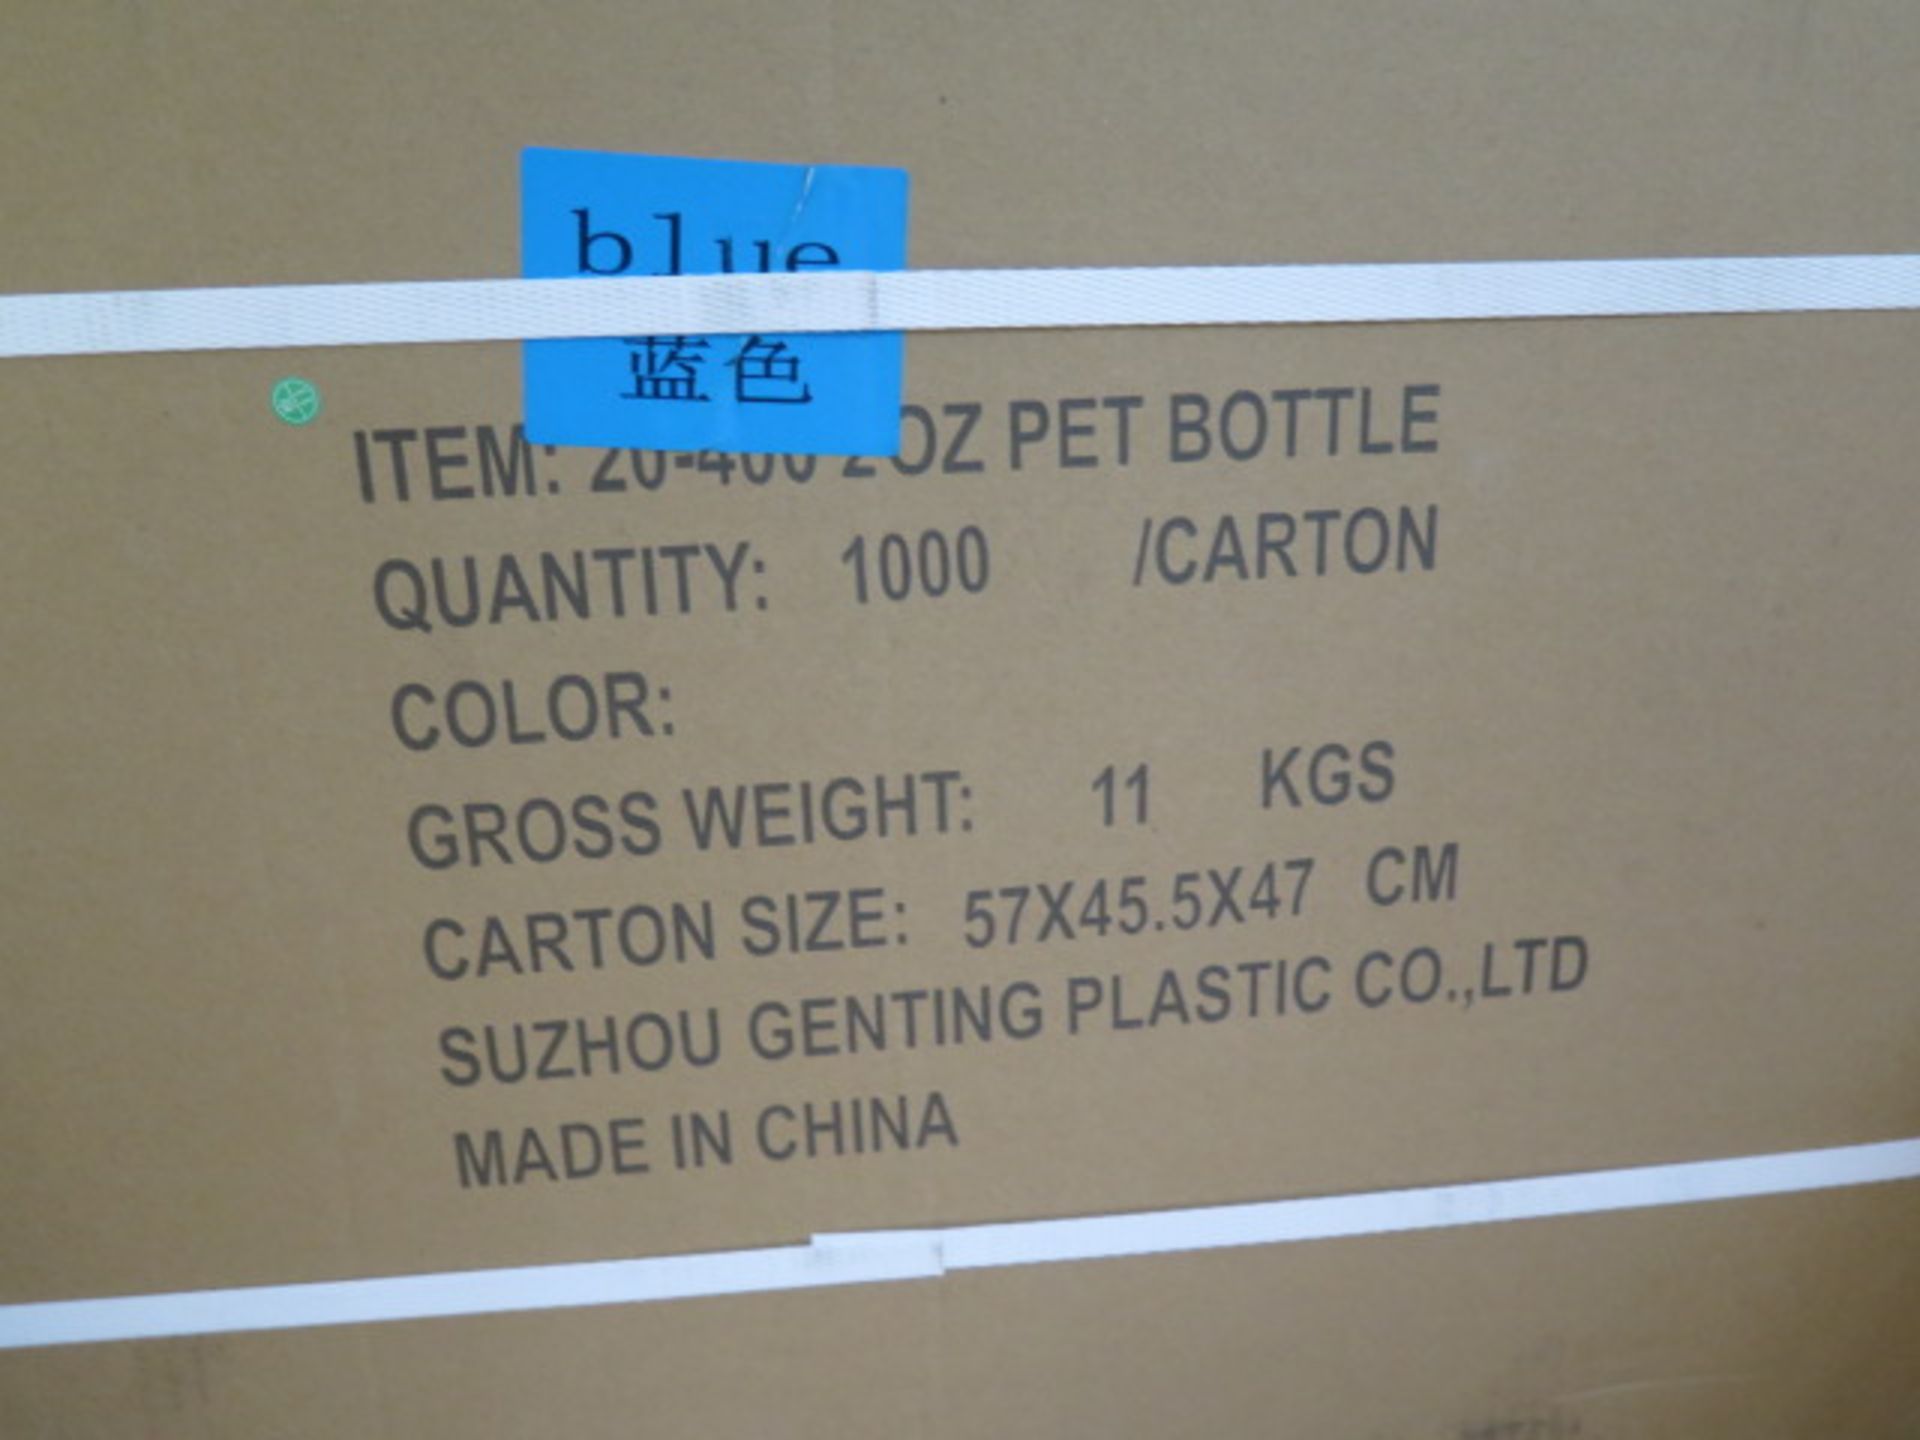 Mixed of 1 oz, 2 oz, 4 oz, 16 oz, 60ml and 120ml 20-400 Plastic Bottles (Approx 138,000) SOLD AS IS - Image 16 of 27